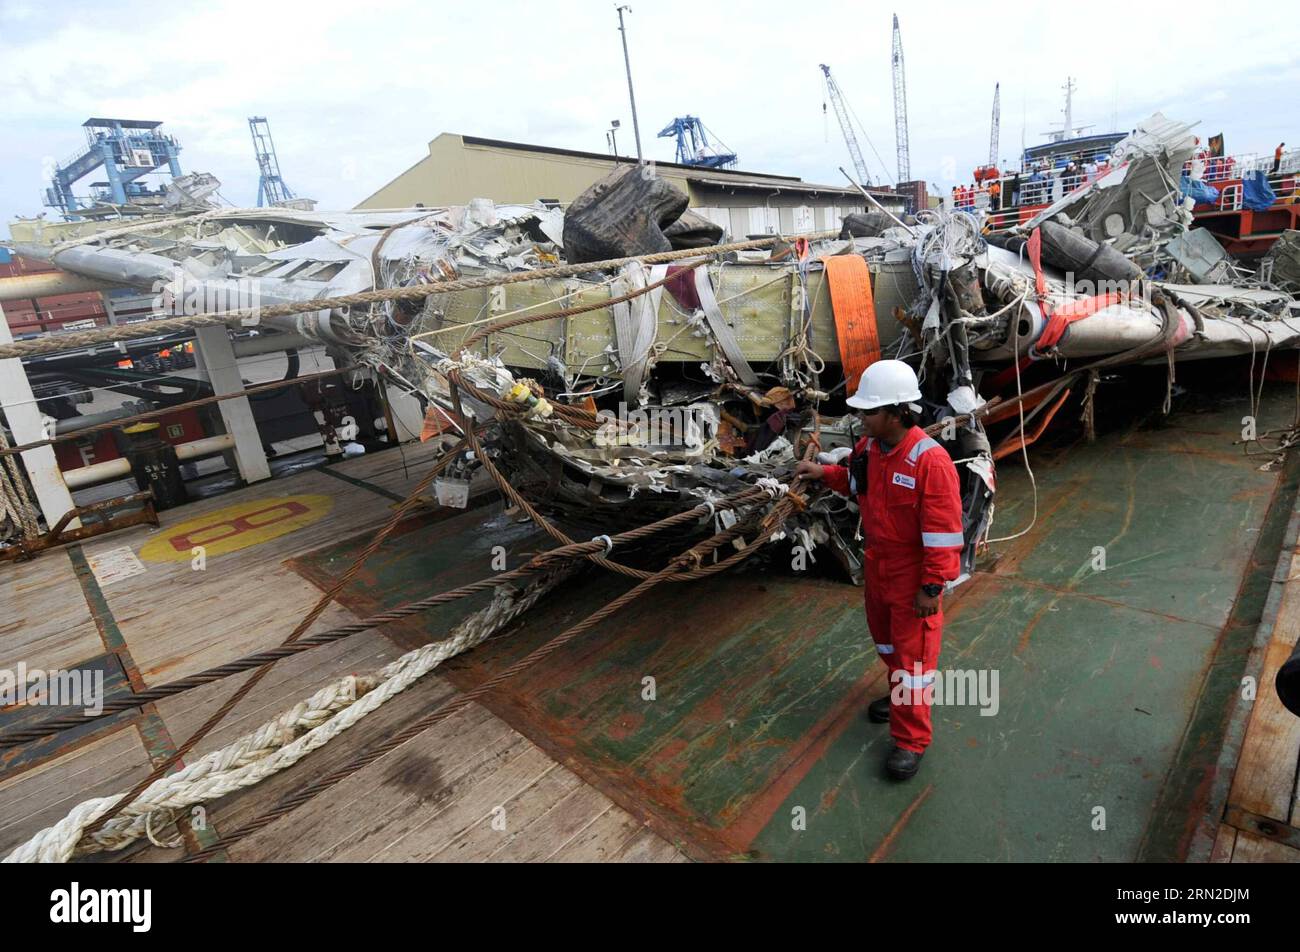 (150302) -- JAKARTA, March 2, 2015 -- An official checks a large part of AirAsia QZ 8501 fuselage at Tanjung Priok harbor in Jakarta, Indonesia, March 2, 2015. Indonesian officials said on Saturday that the final major part of the fuselage of the AirAsia QZ 8501 has been retrieved. AirAsia QZ 8501 was crashed in Karimata Strait enroute from Indonesia s city of Surabaya for Singapore on Dec. 28, killing all 162 people onboard. ) INDONESIA-JAKARTA-AIRASIA-PLANE-RETRIEVAL AgungxKuncahyaxB. PUBLICATIONxNOTxINxCHN   Jakarta March 2 2015 to Official Checks a Large Part of AirAsia  8501 fuselage AT T Stock Photo